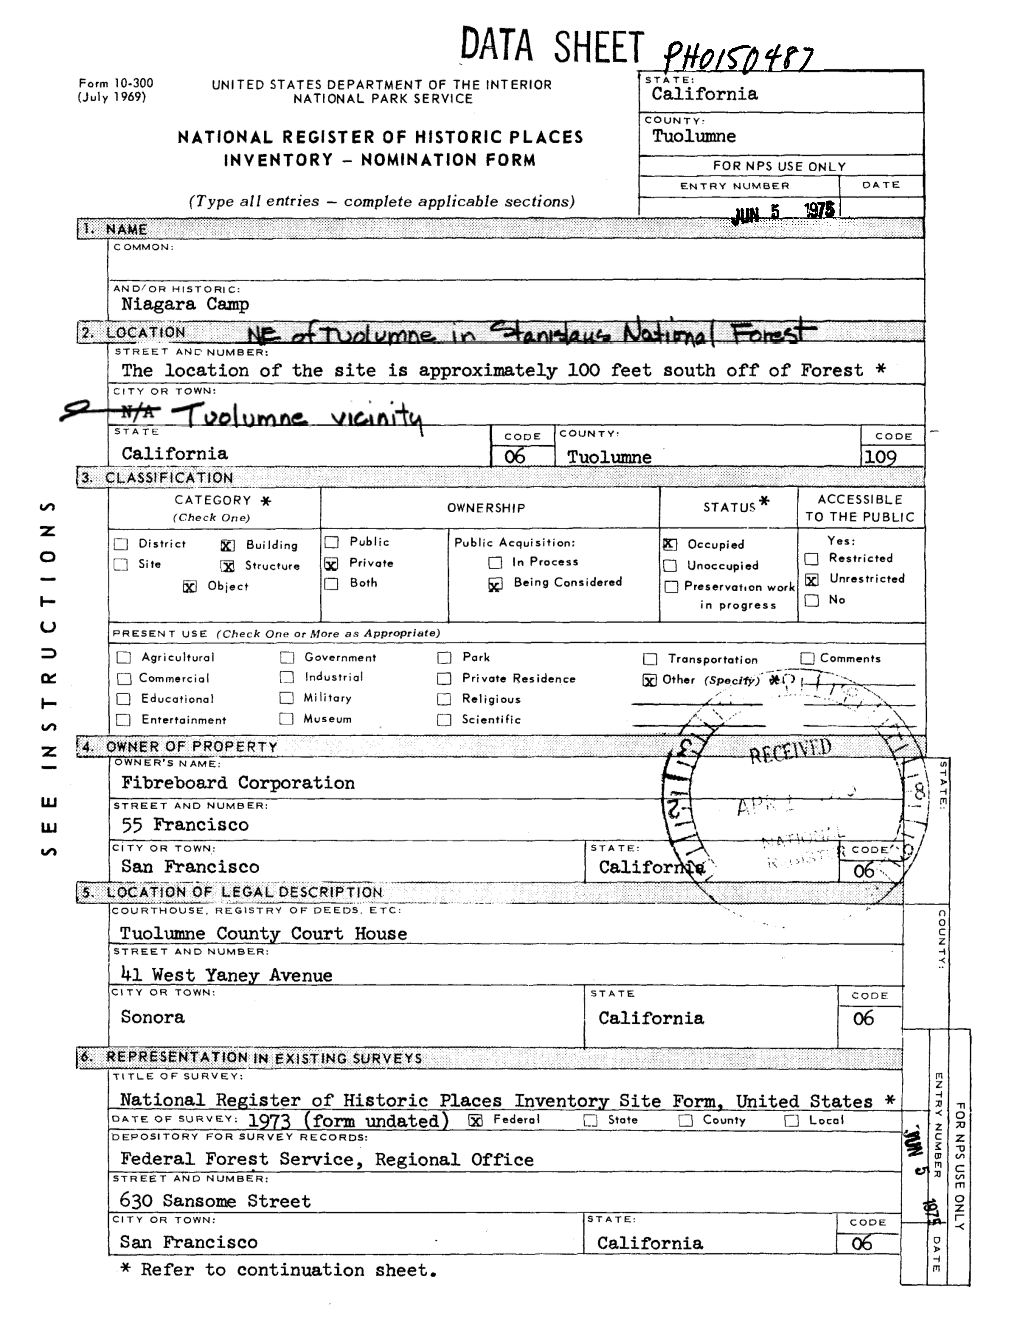 National Register of Historic Places Inventory Site Form